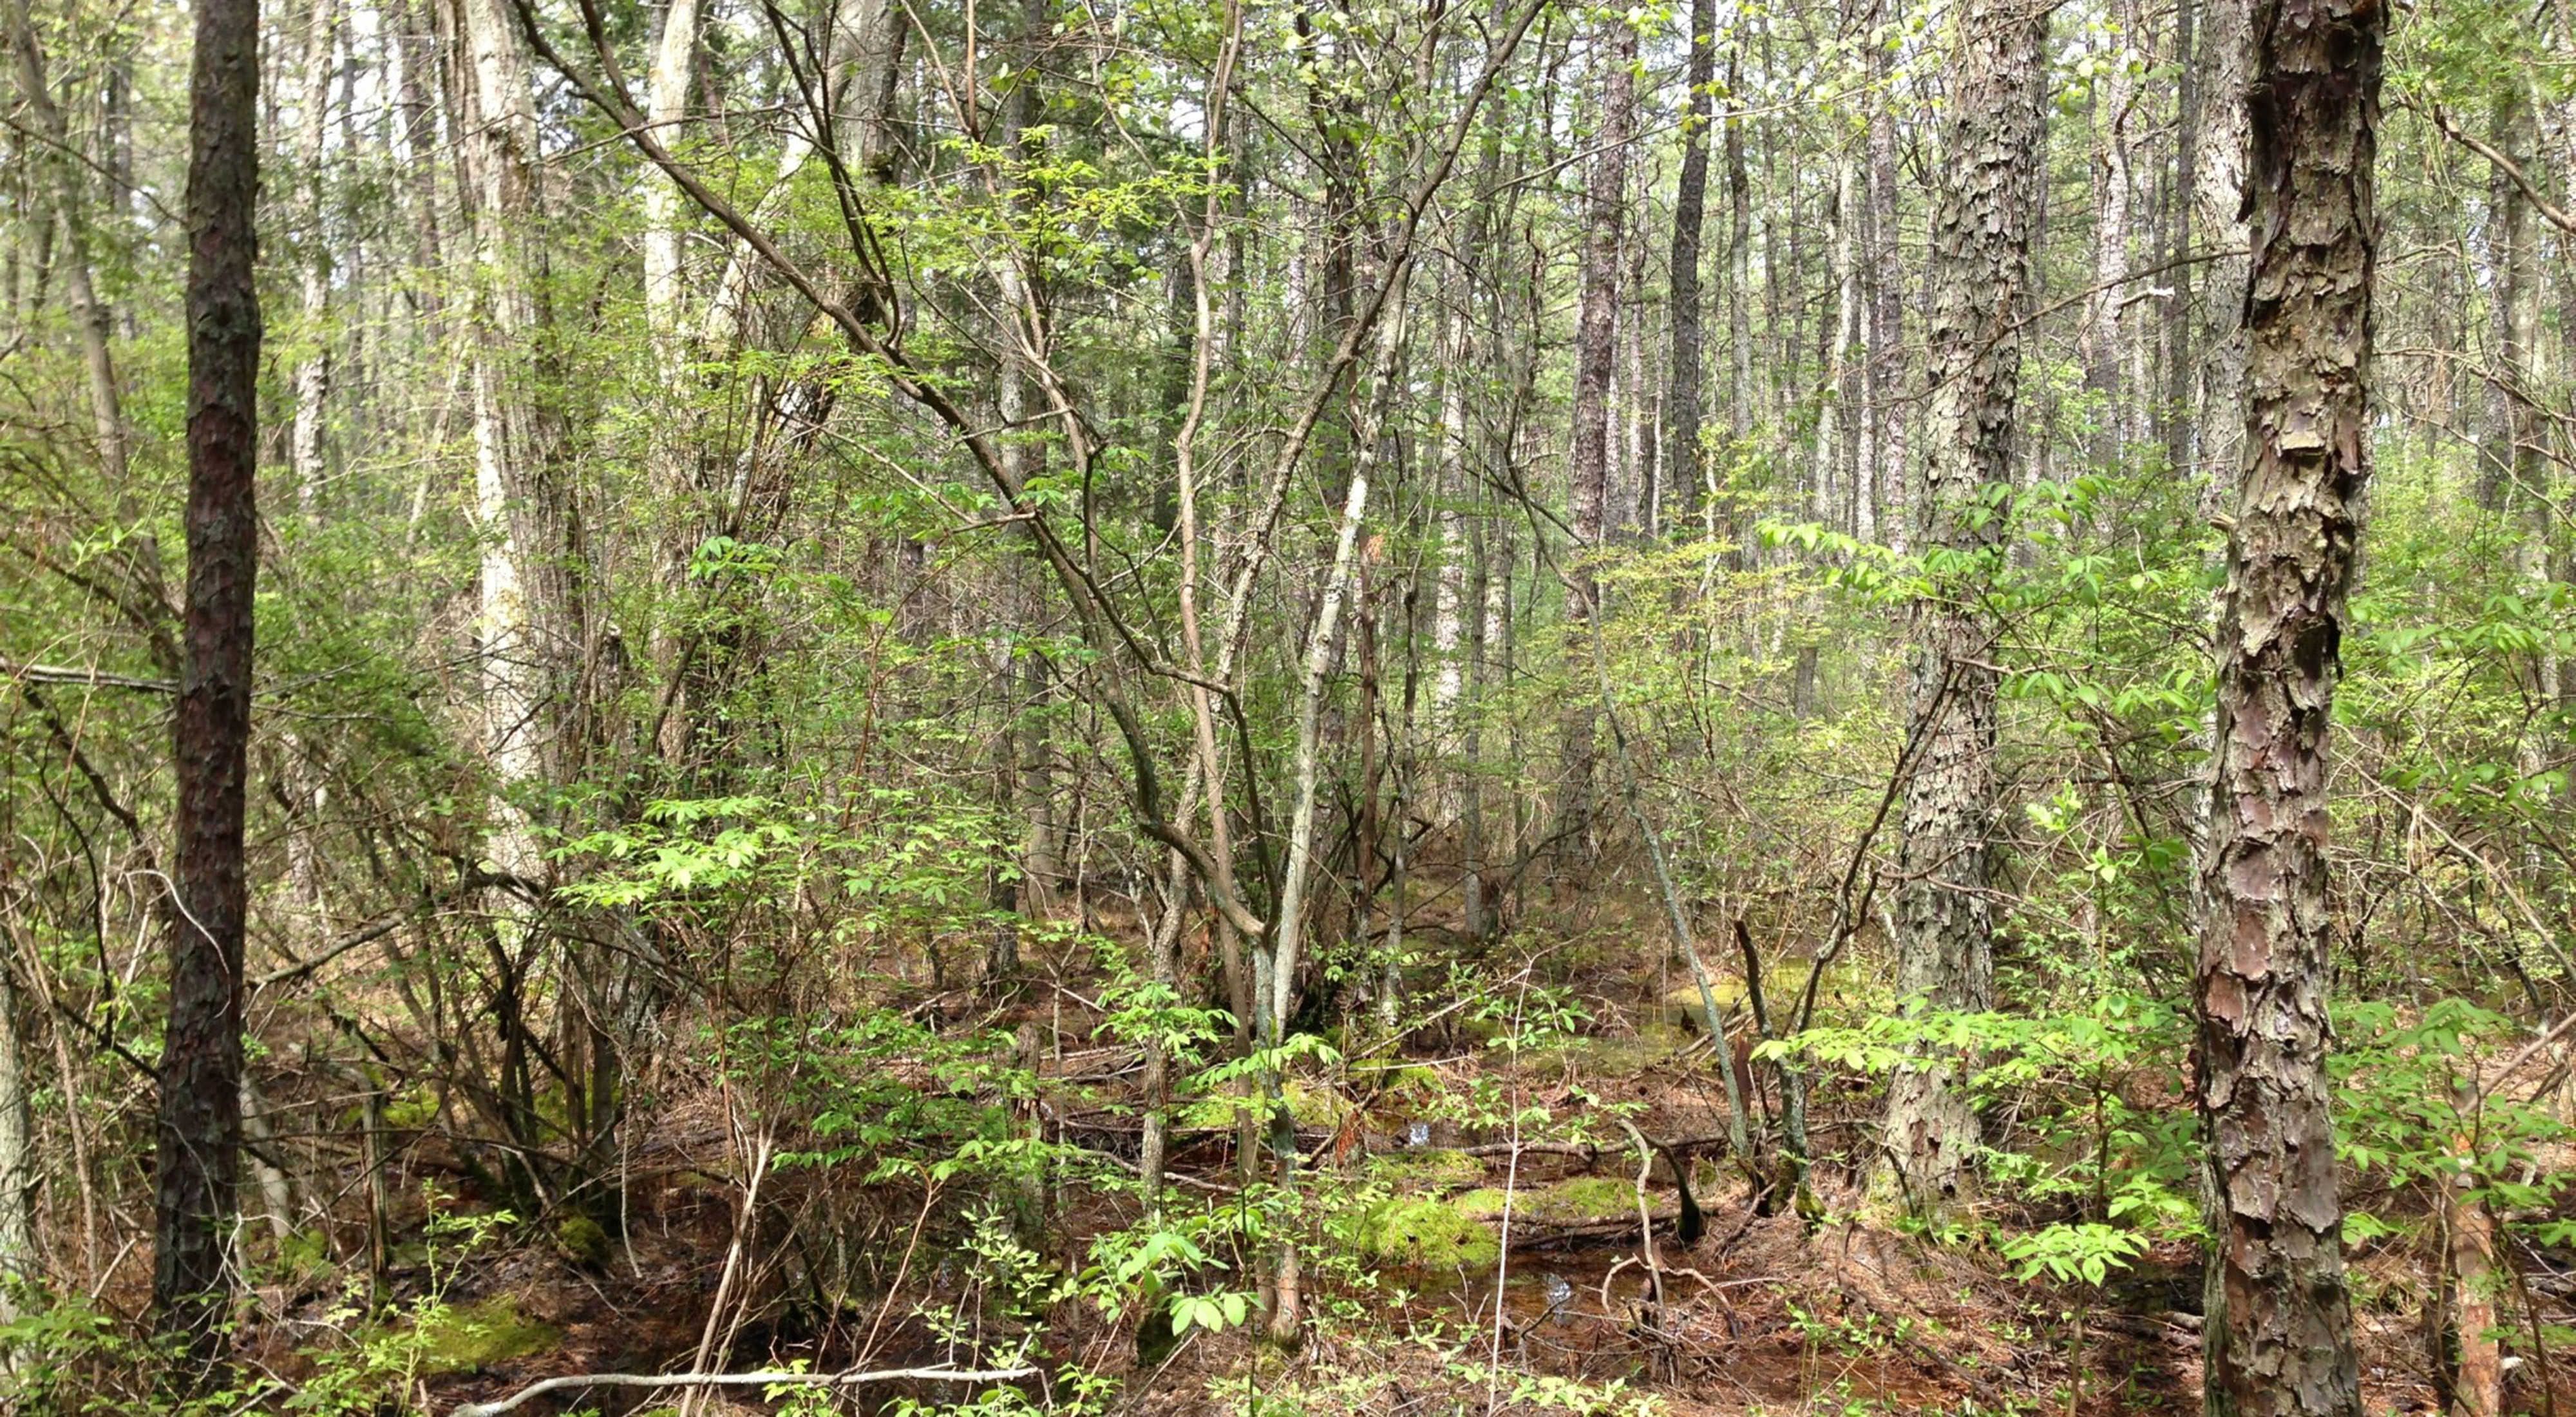 Trees with grey bark and bright green trees are part of a swampy forest.